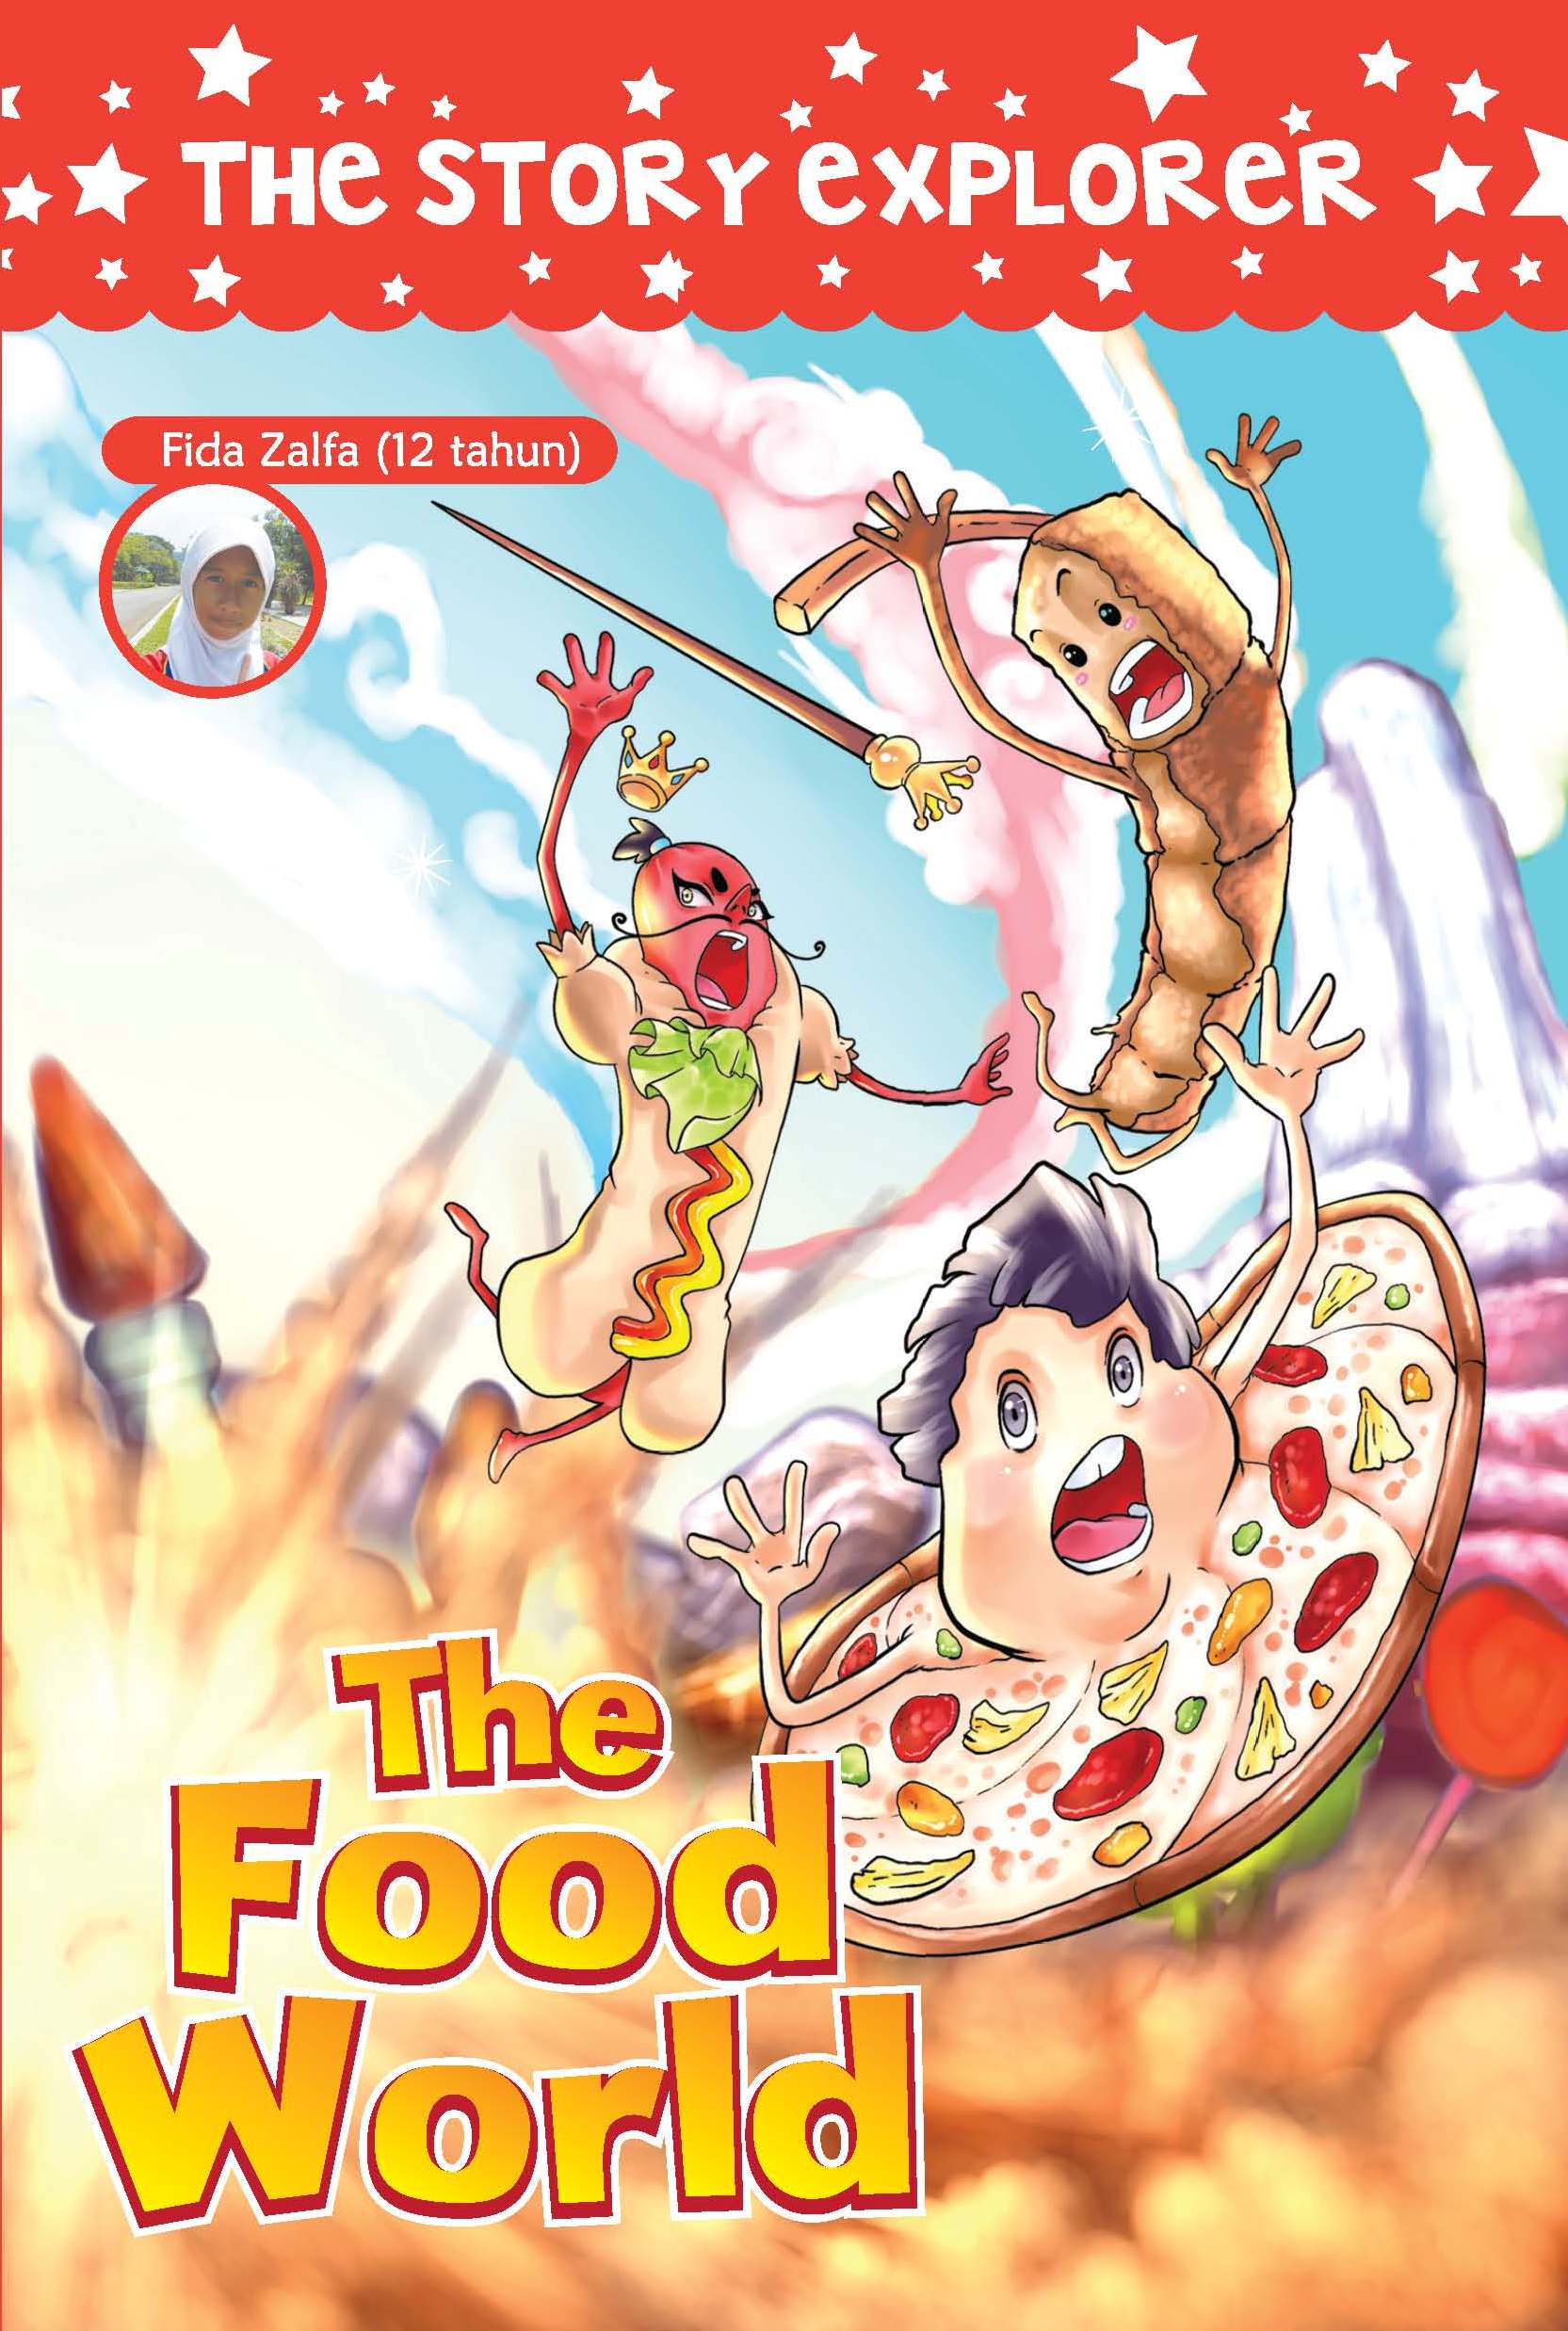 The Story Explorer : The Food World